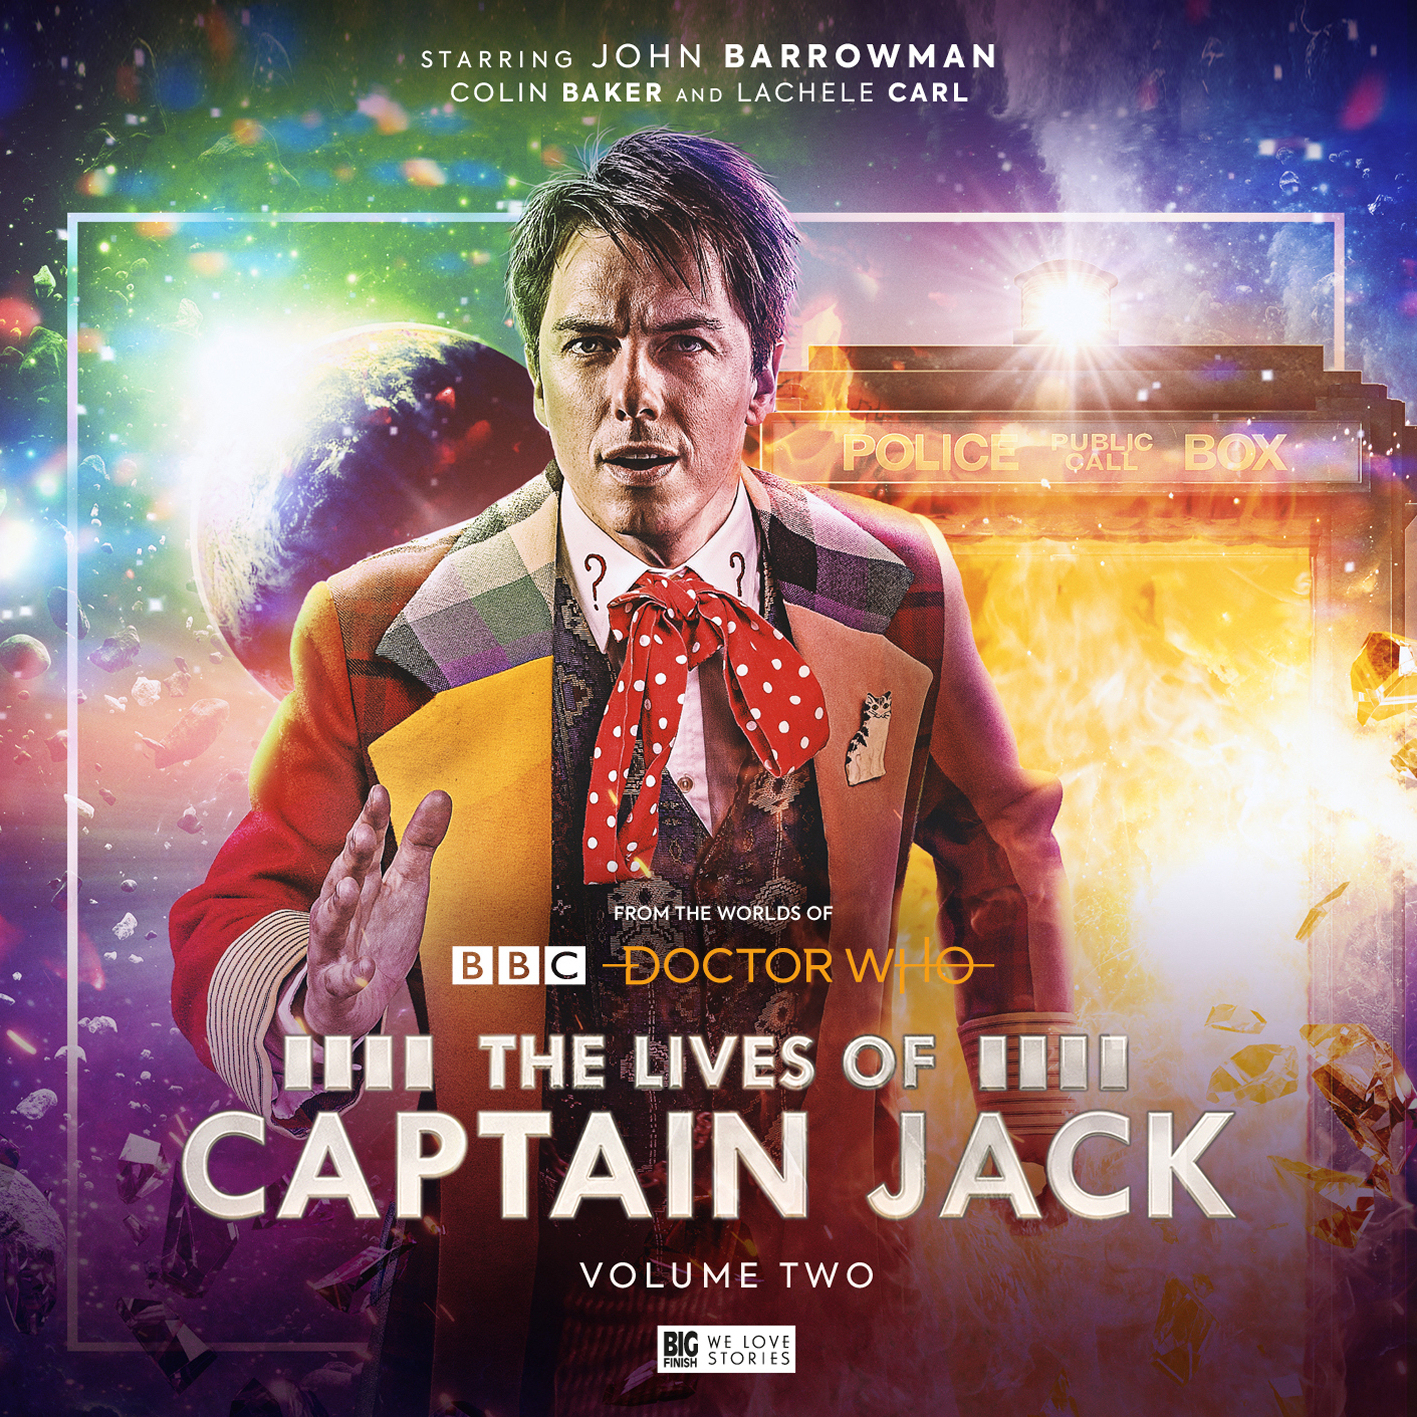 In the hands of “the Doctor”. (AUDIO: The Lives of Captain Jack: Volume Two)